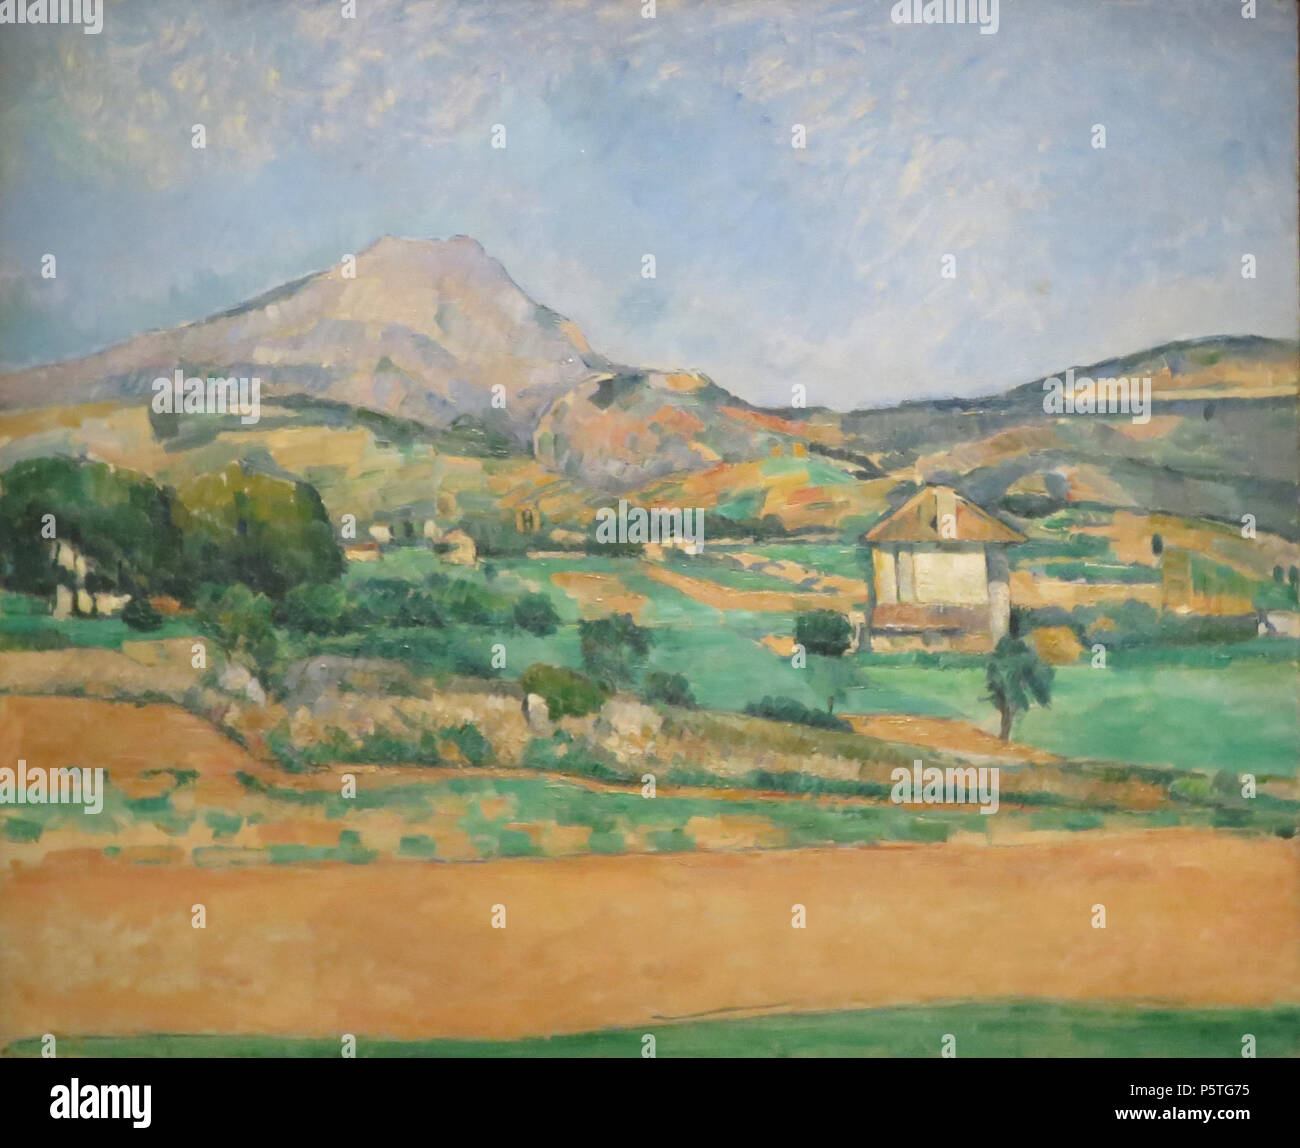 N/A.  English: The Plain with Mont Sainte Victoire, View from Valcros, oil on canvas, Pushkin Museum Deutsch: Ebene mit dem Mont Sainte Victoire . between 1879 and 1880.    Paul Cézanne  (1839–1906)       Alternative names Cézanne; Paul Cezanne; Cezanne  Description French painter  Date of birth/death 19 January 1839 22 October 1906  Location of birth/death Aix-en-Provence Aix-en-Provence  Work location Paris, Auvers-sur-Oise, Aix-en-Provence, Marseille  Authority control  : Q35548 VIAF:39374836 ISNI:0000 0001 2128 7379 ULAN:500004793 LCCN:n79055446 NLA:35026986 WorldCat 287 Cezanne - Ebene mi Stock Photo